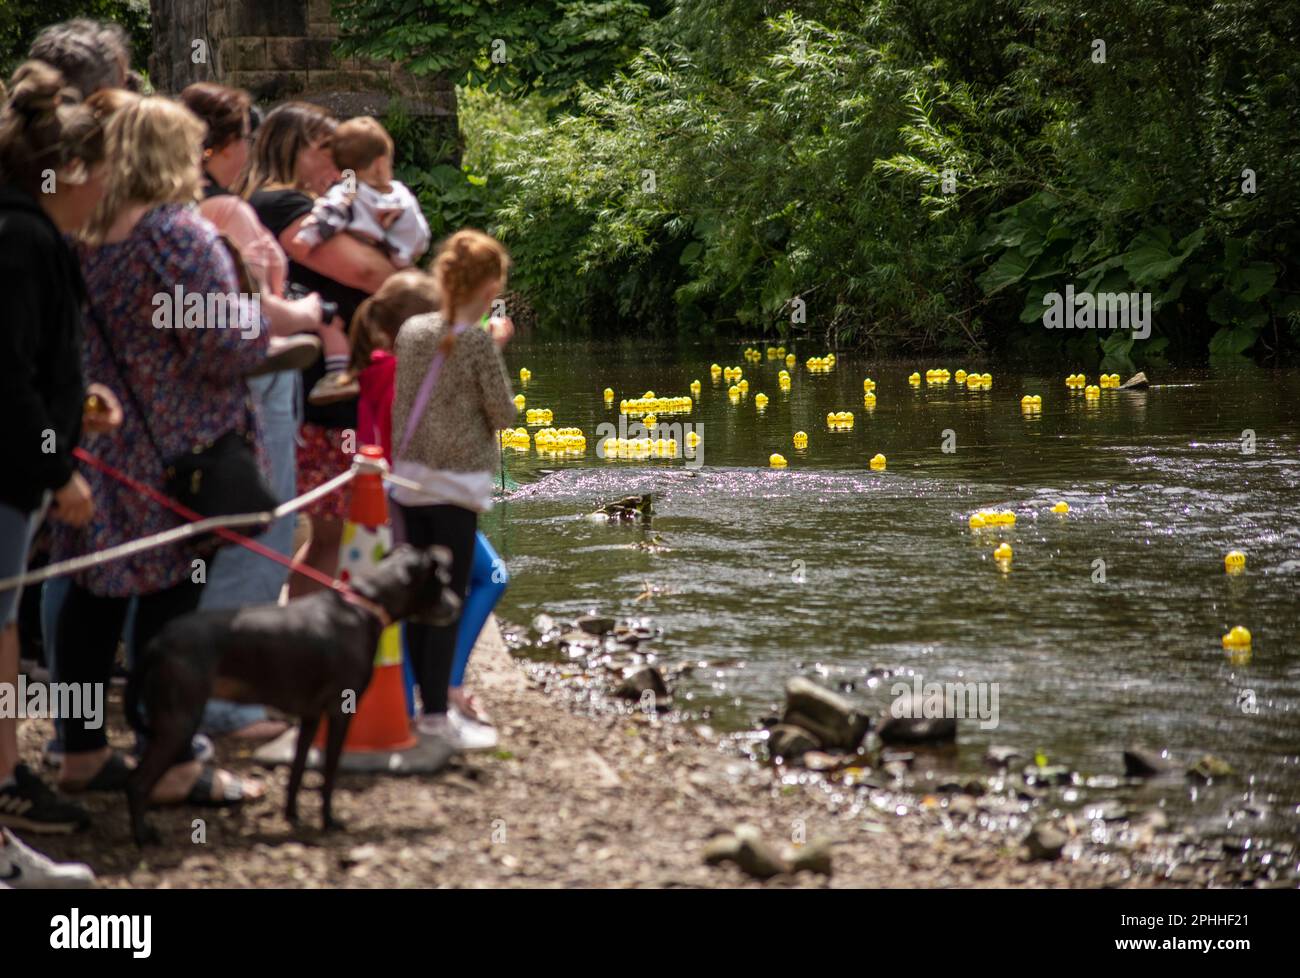 Duck race on the River Goyt through New Mills, in the Derbyshire High Peak, hundreds of plastic yellow ducks race down the river to win prizes Stock Photo